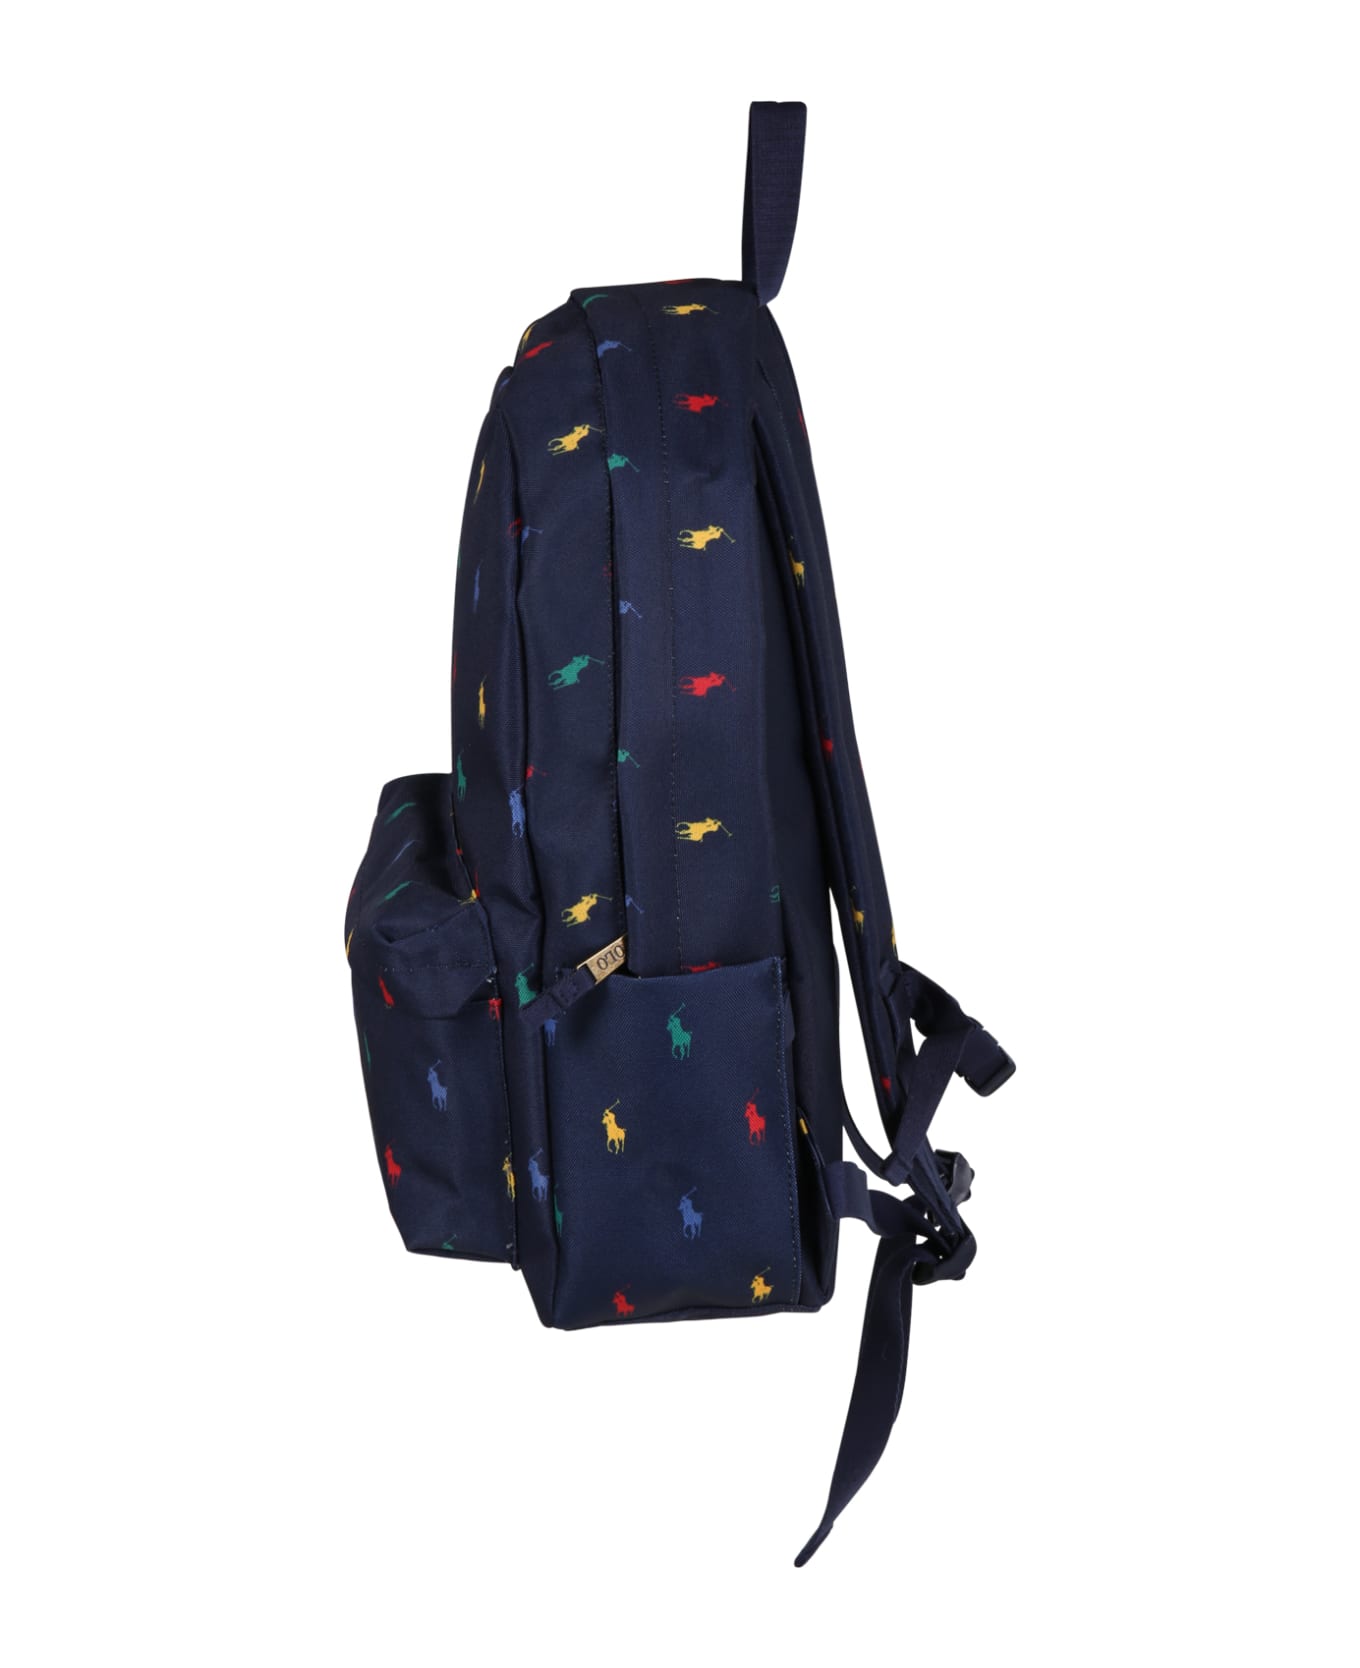 Ralph Lauren Blue Backpack For Kids With Pony Logos - Blue